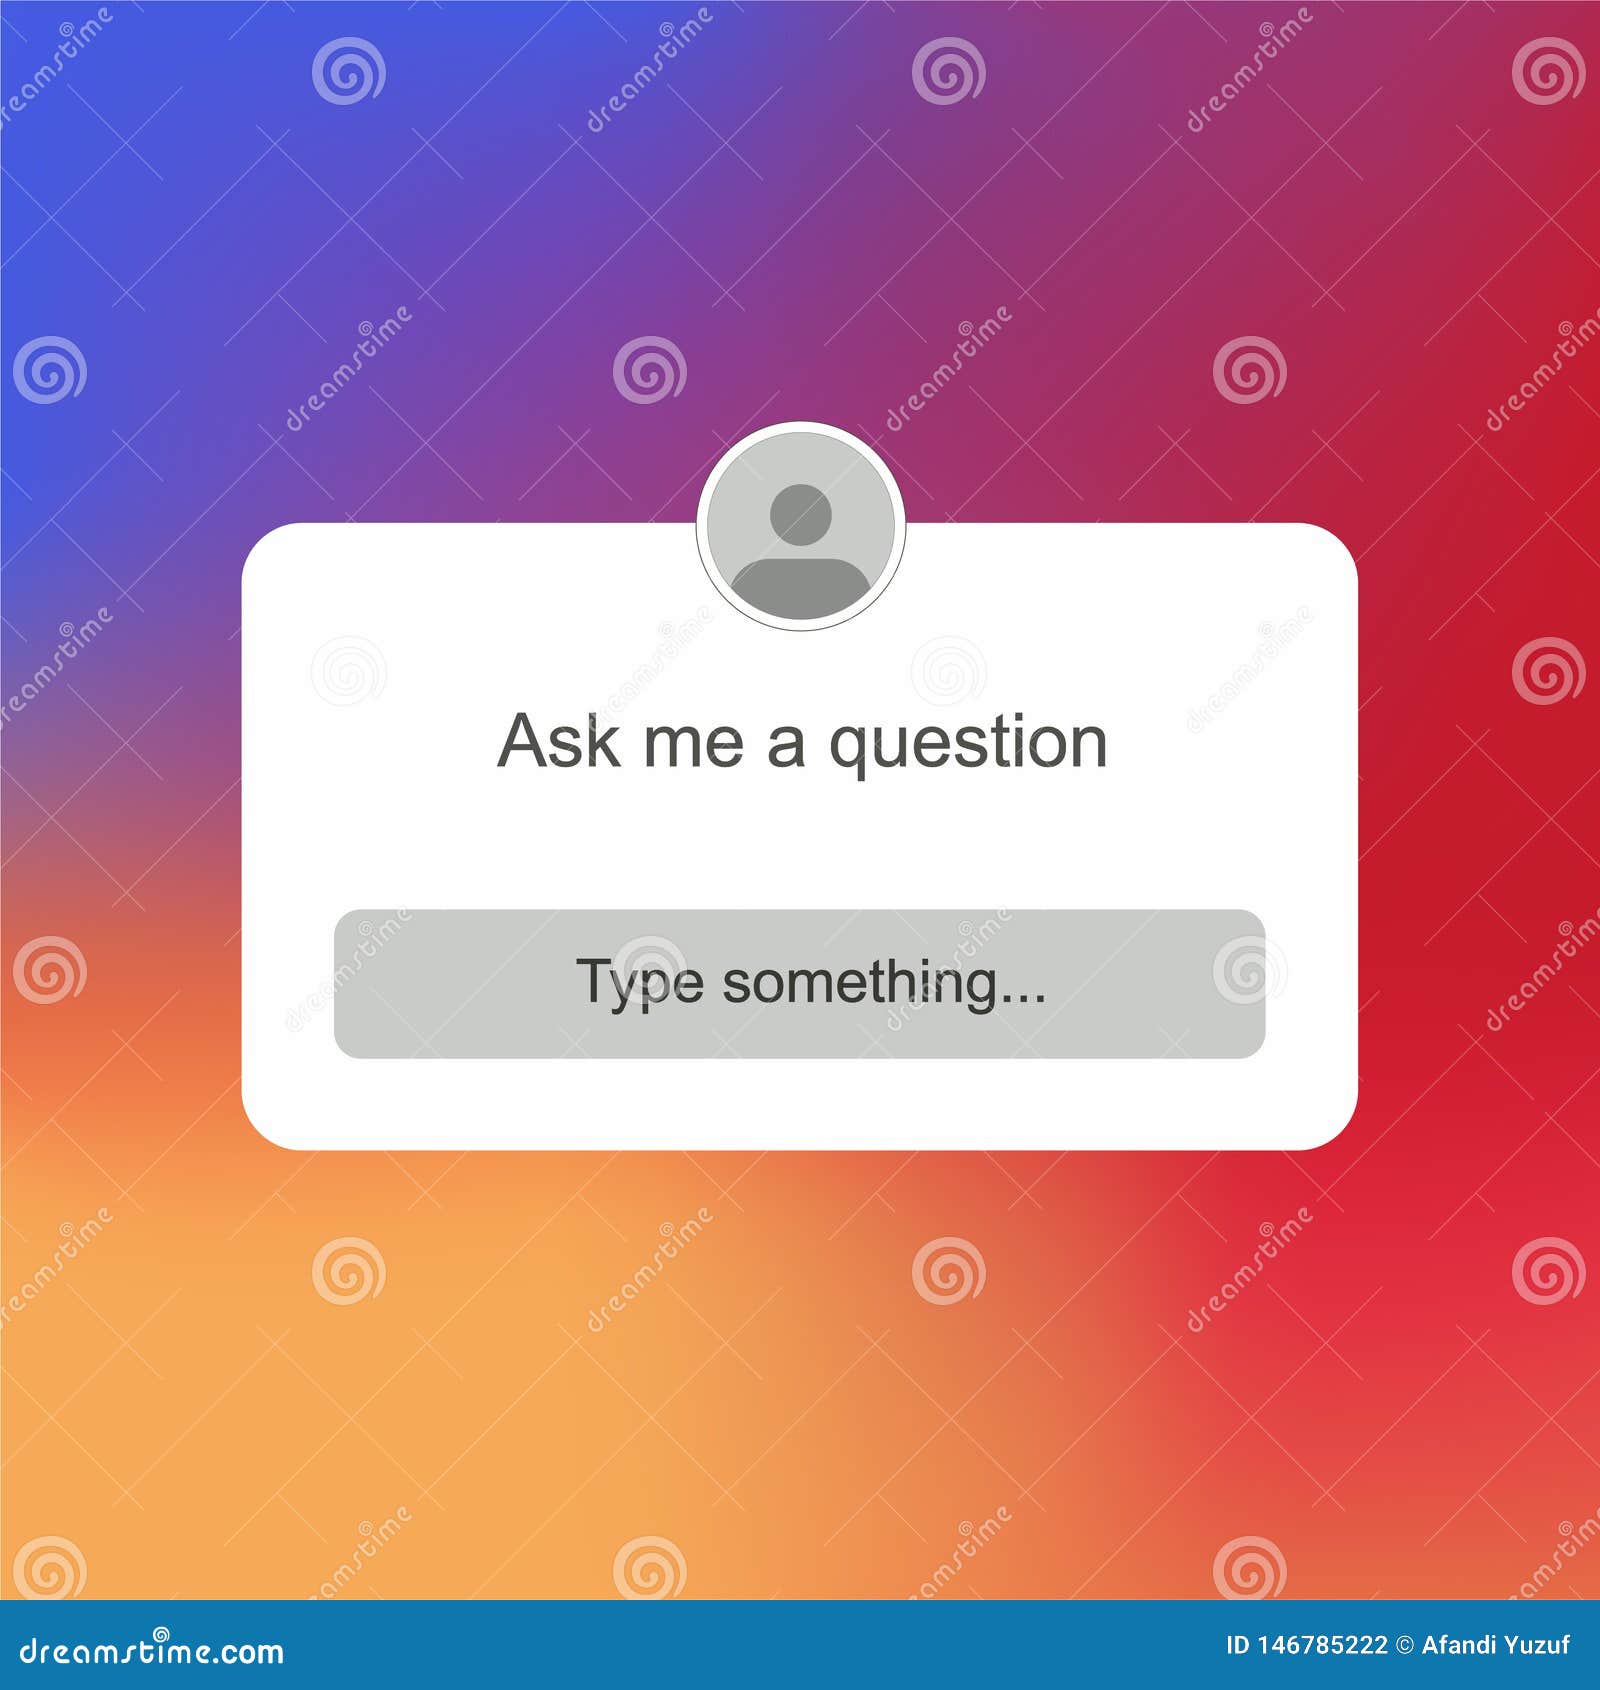 Download Instagram Ask Me A Question User Interface Design Vector Stock Vector - Illustration of future ...